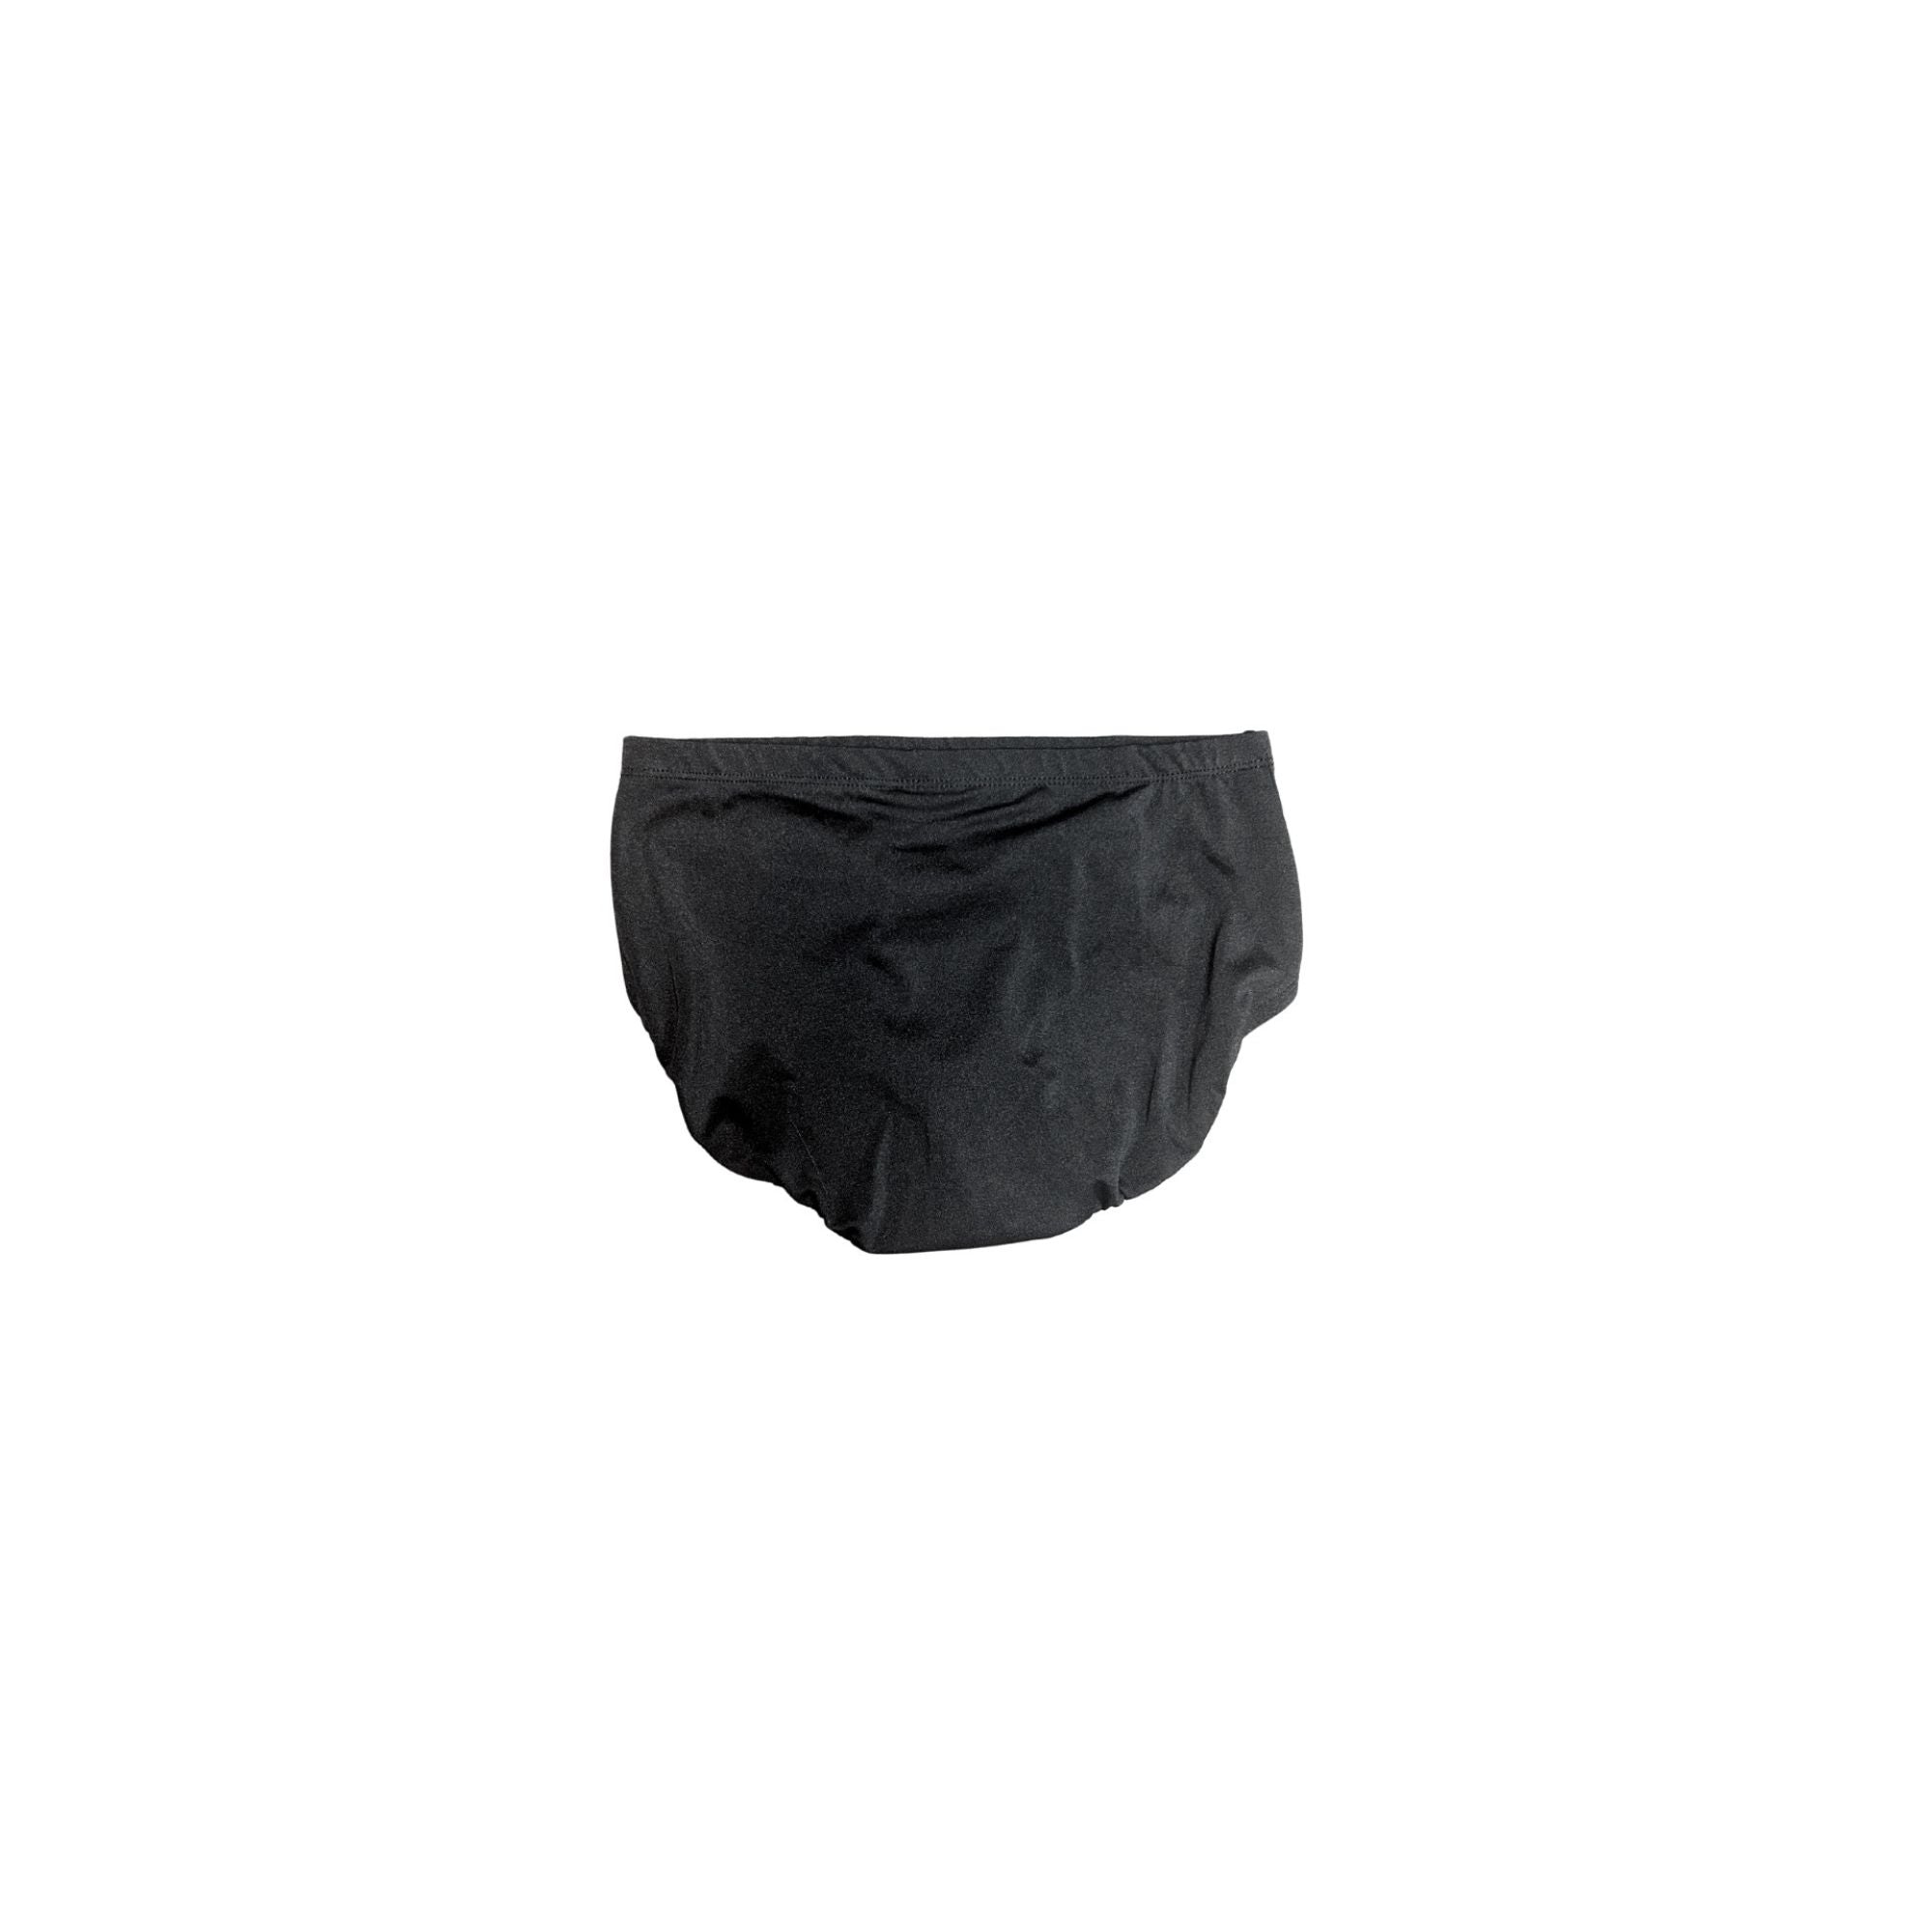 Body Wrappers P1015 Brief Black Back